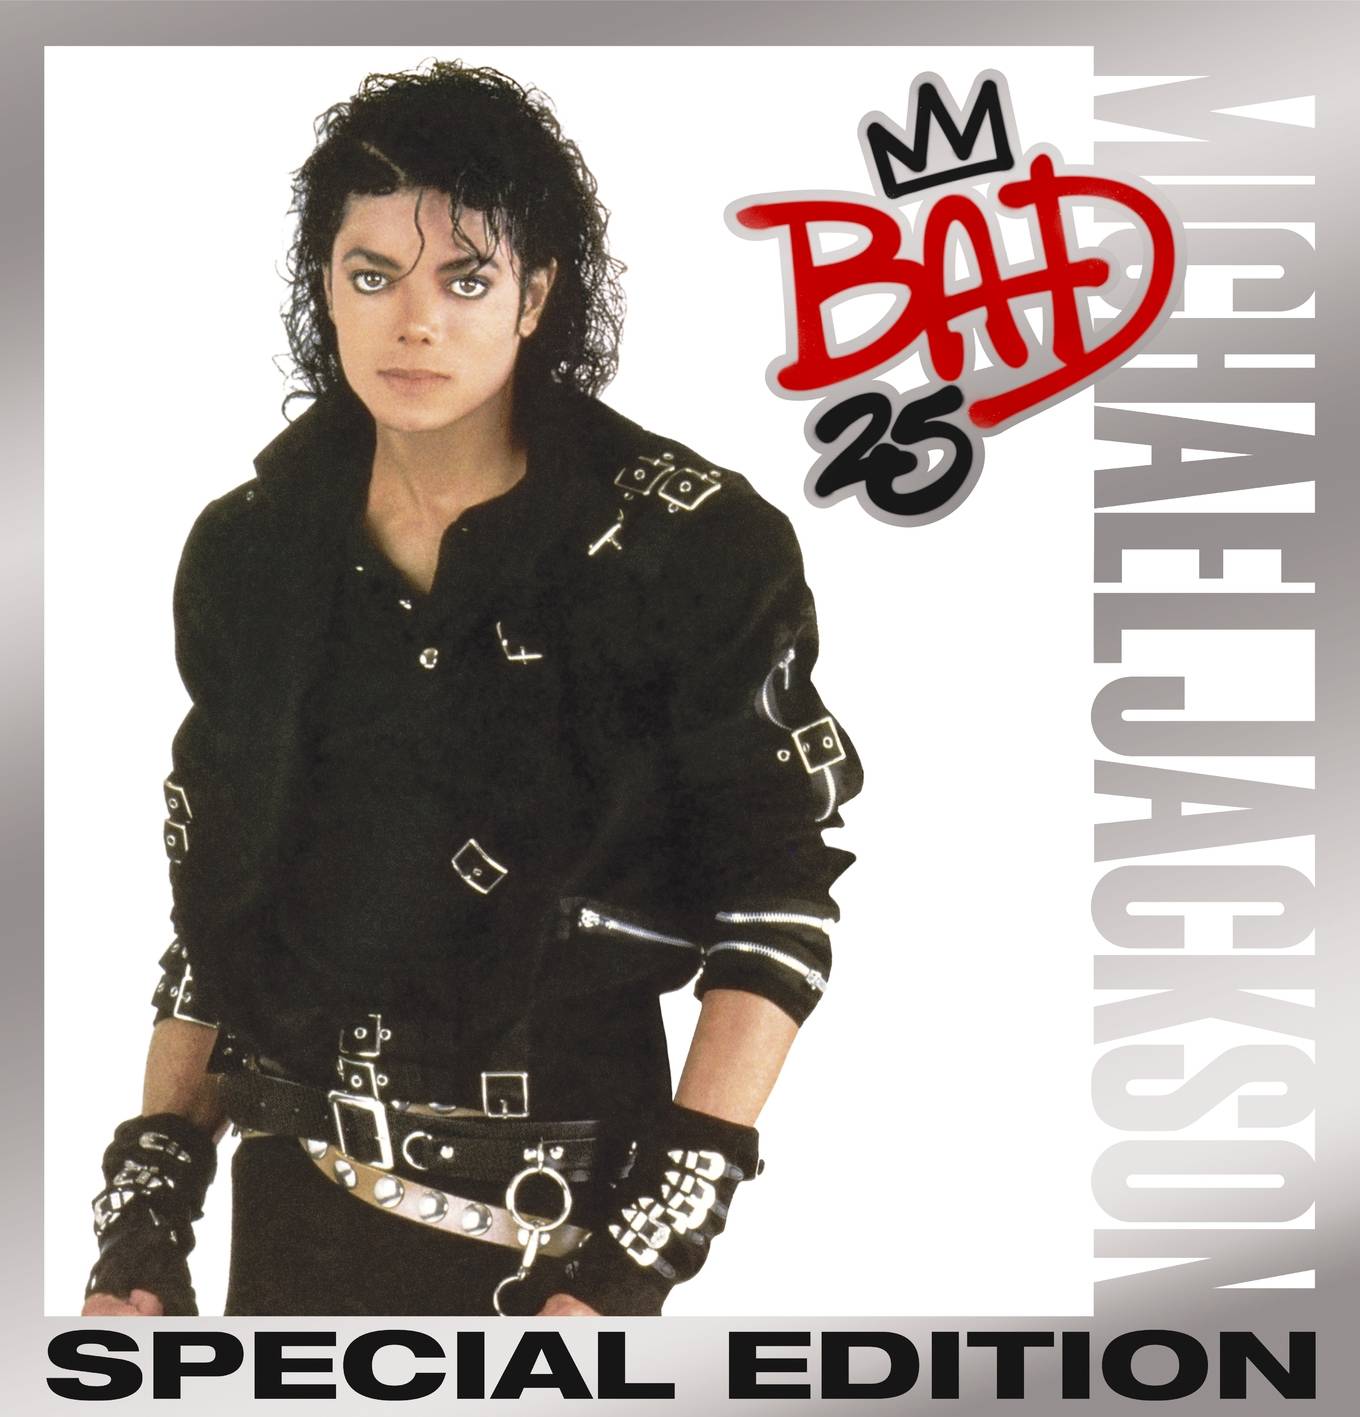 Michael Jackson – Bad {25th Anniversary Special Edition} (1987/2012) [Official Digital Download 24bit/96kHz]